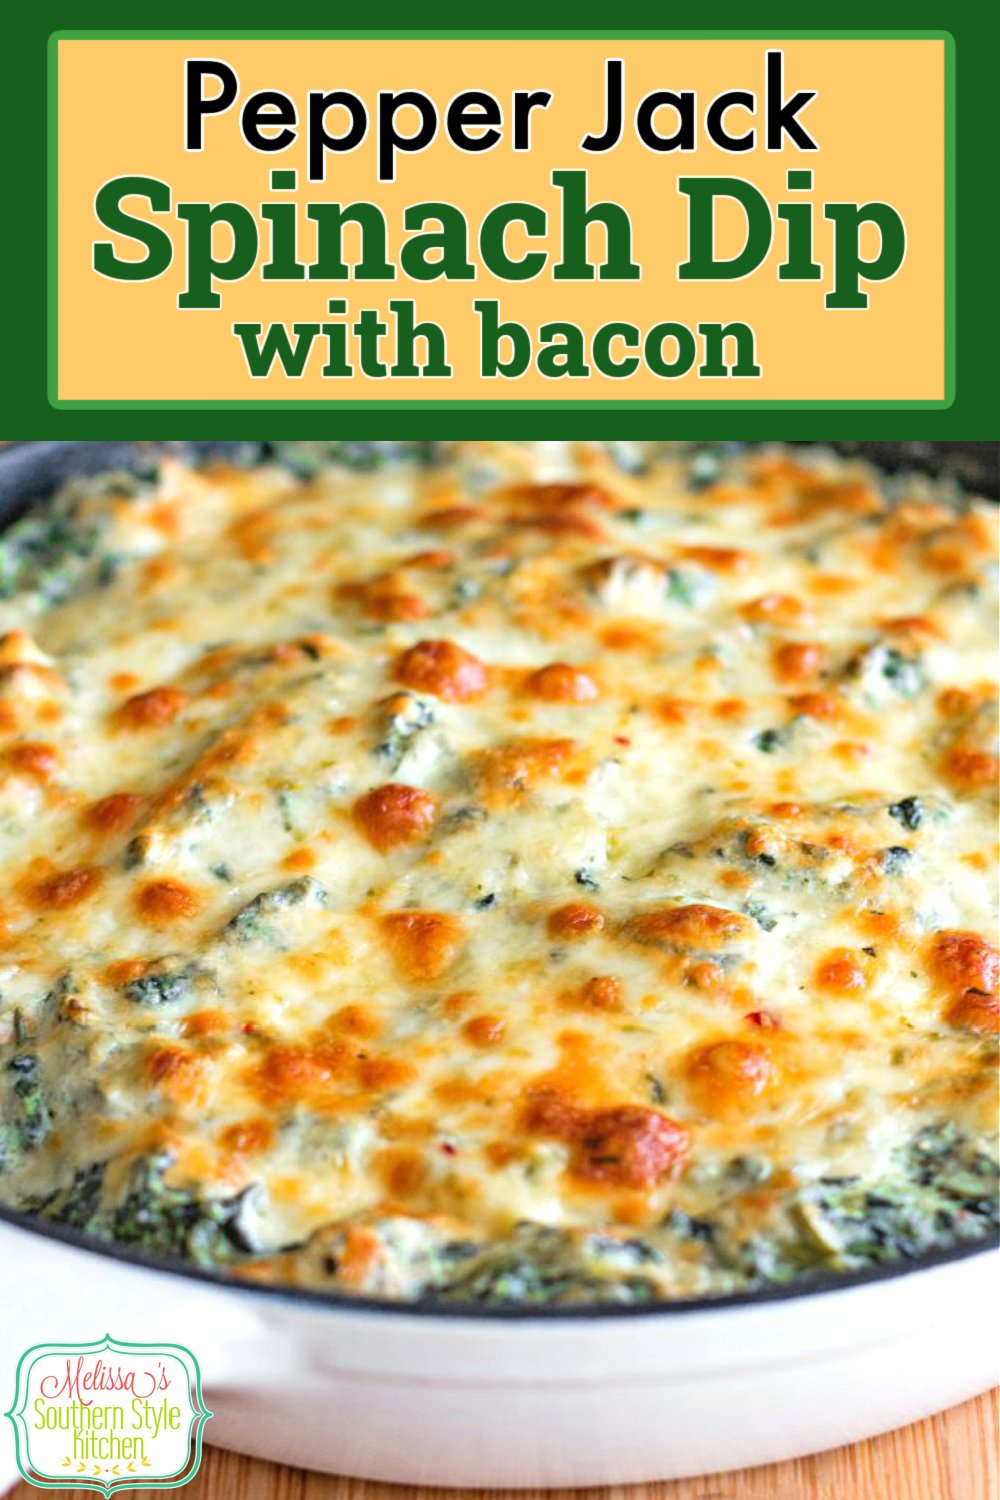 This Pepper Jack Spinach Dip with Bacon will make a stellar addition to your appetizer menu. #spinachdip #bacon #pepperjackcheese #spinachrecipes #appetizers #partyfood #footballrecipes #southernfood #southernrecipes via @melissasssk